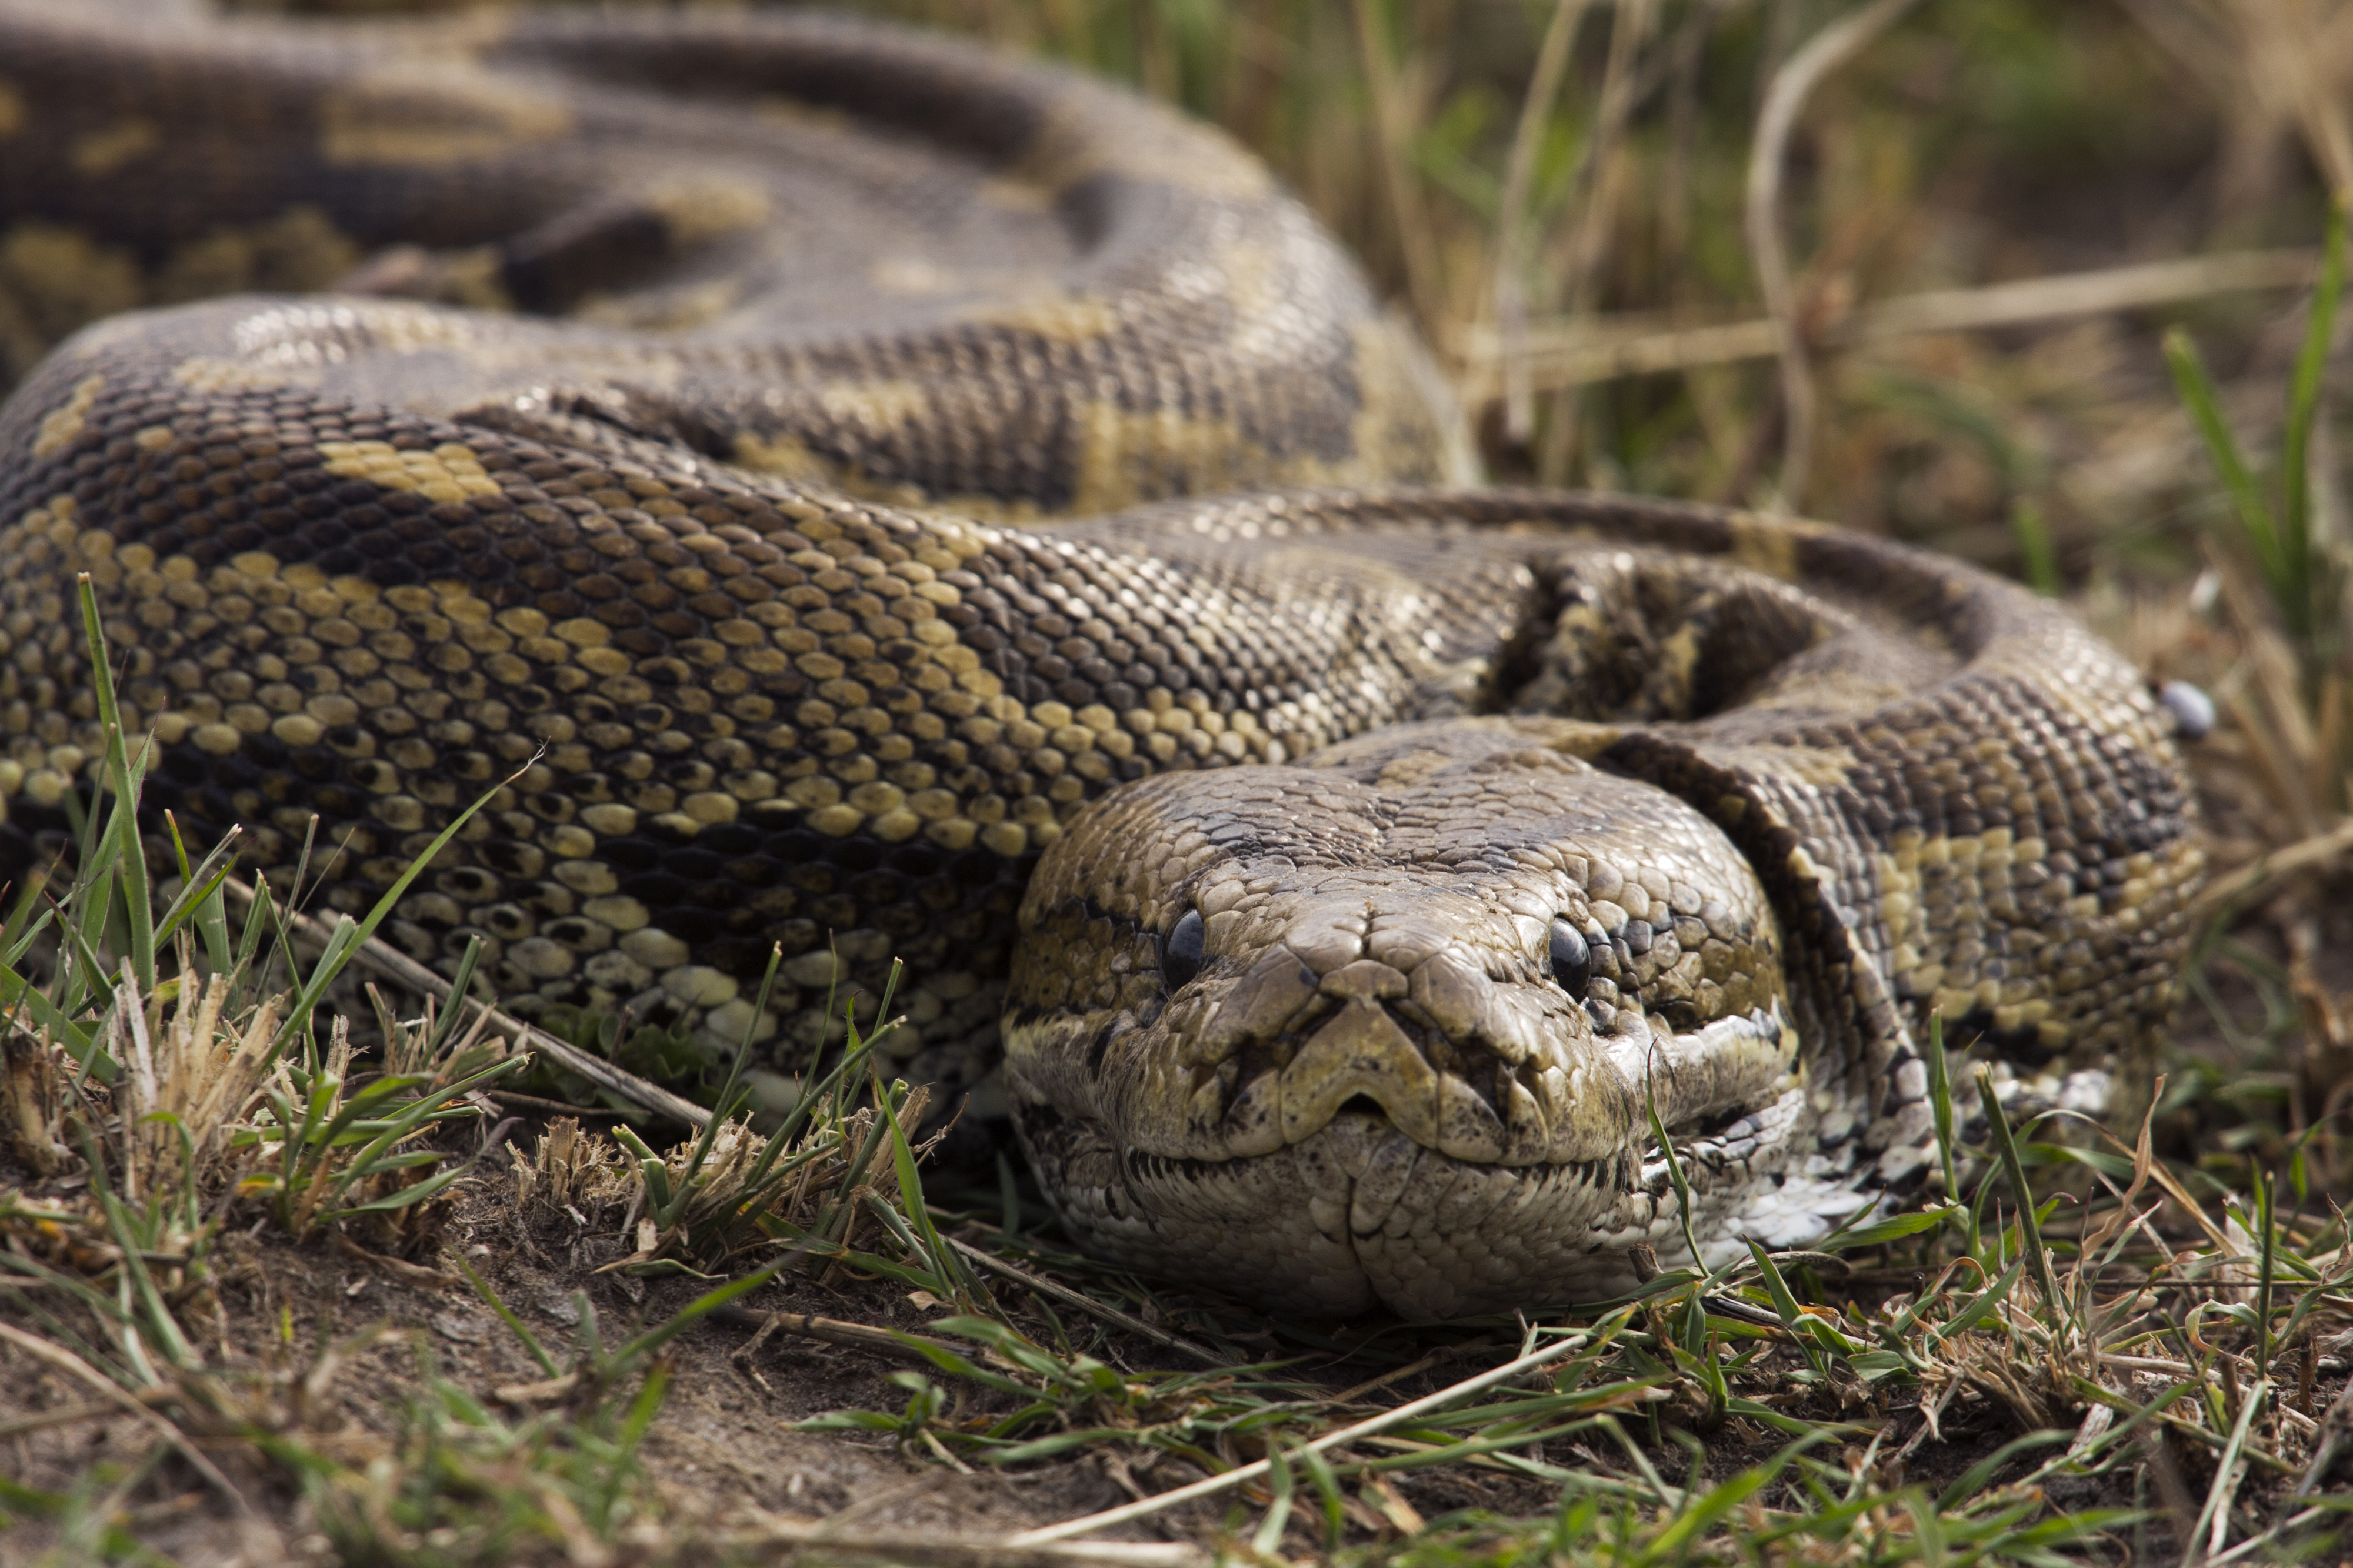 A close-up of a python lying on grass